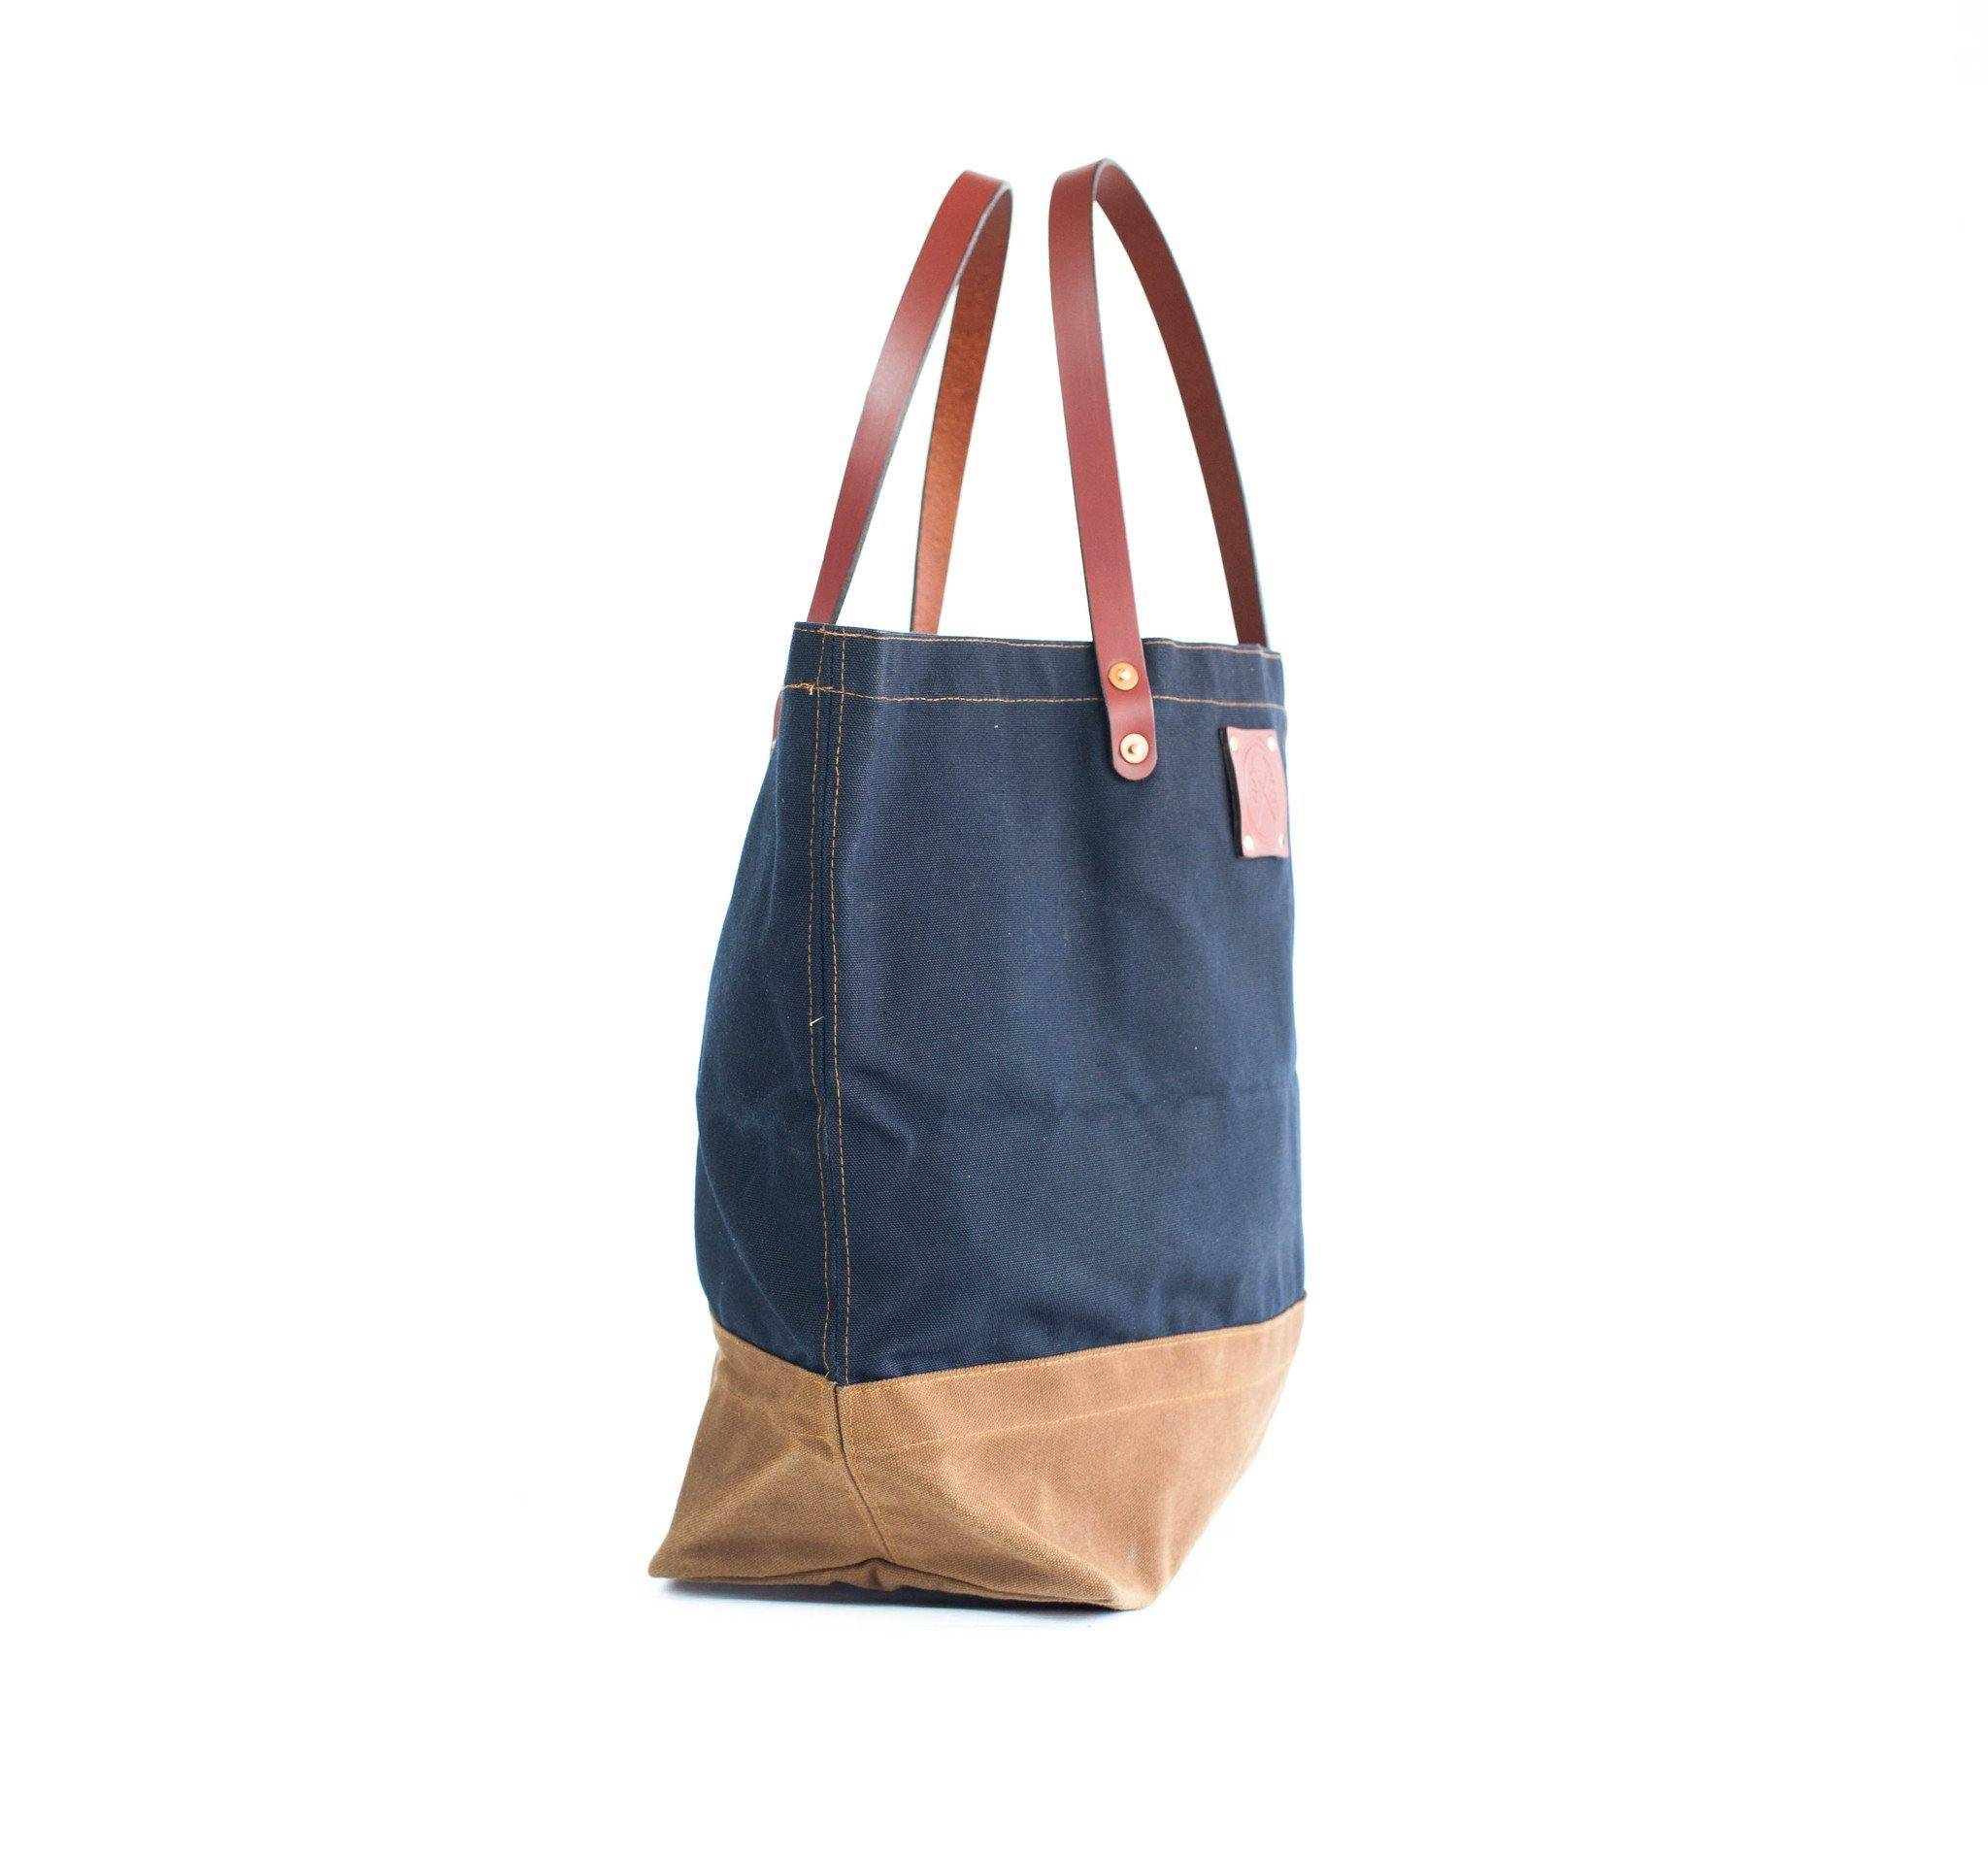 Waxed Canvas and Leather Tote Bag Craft Tote Navy Top